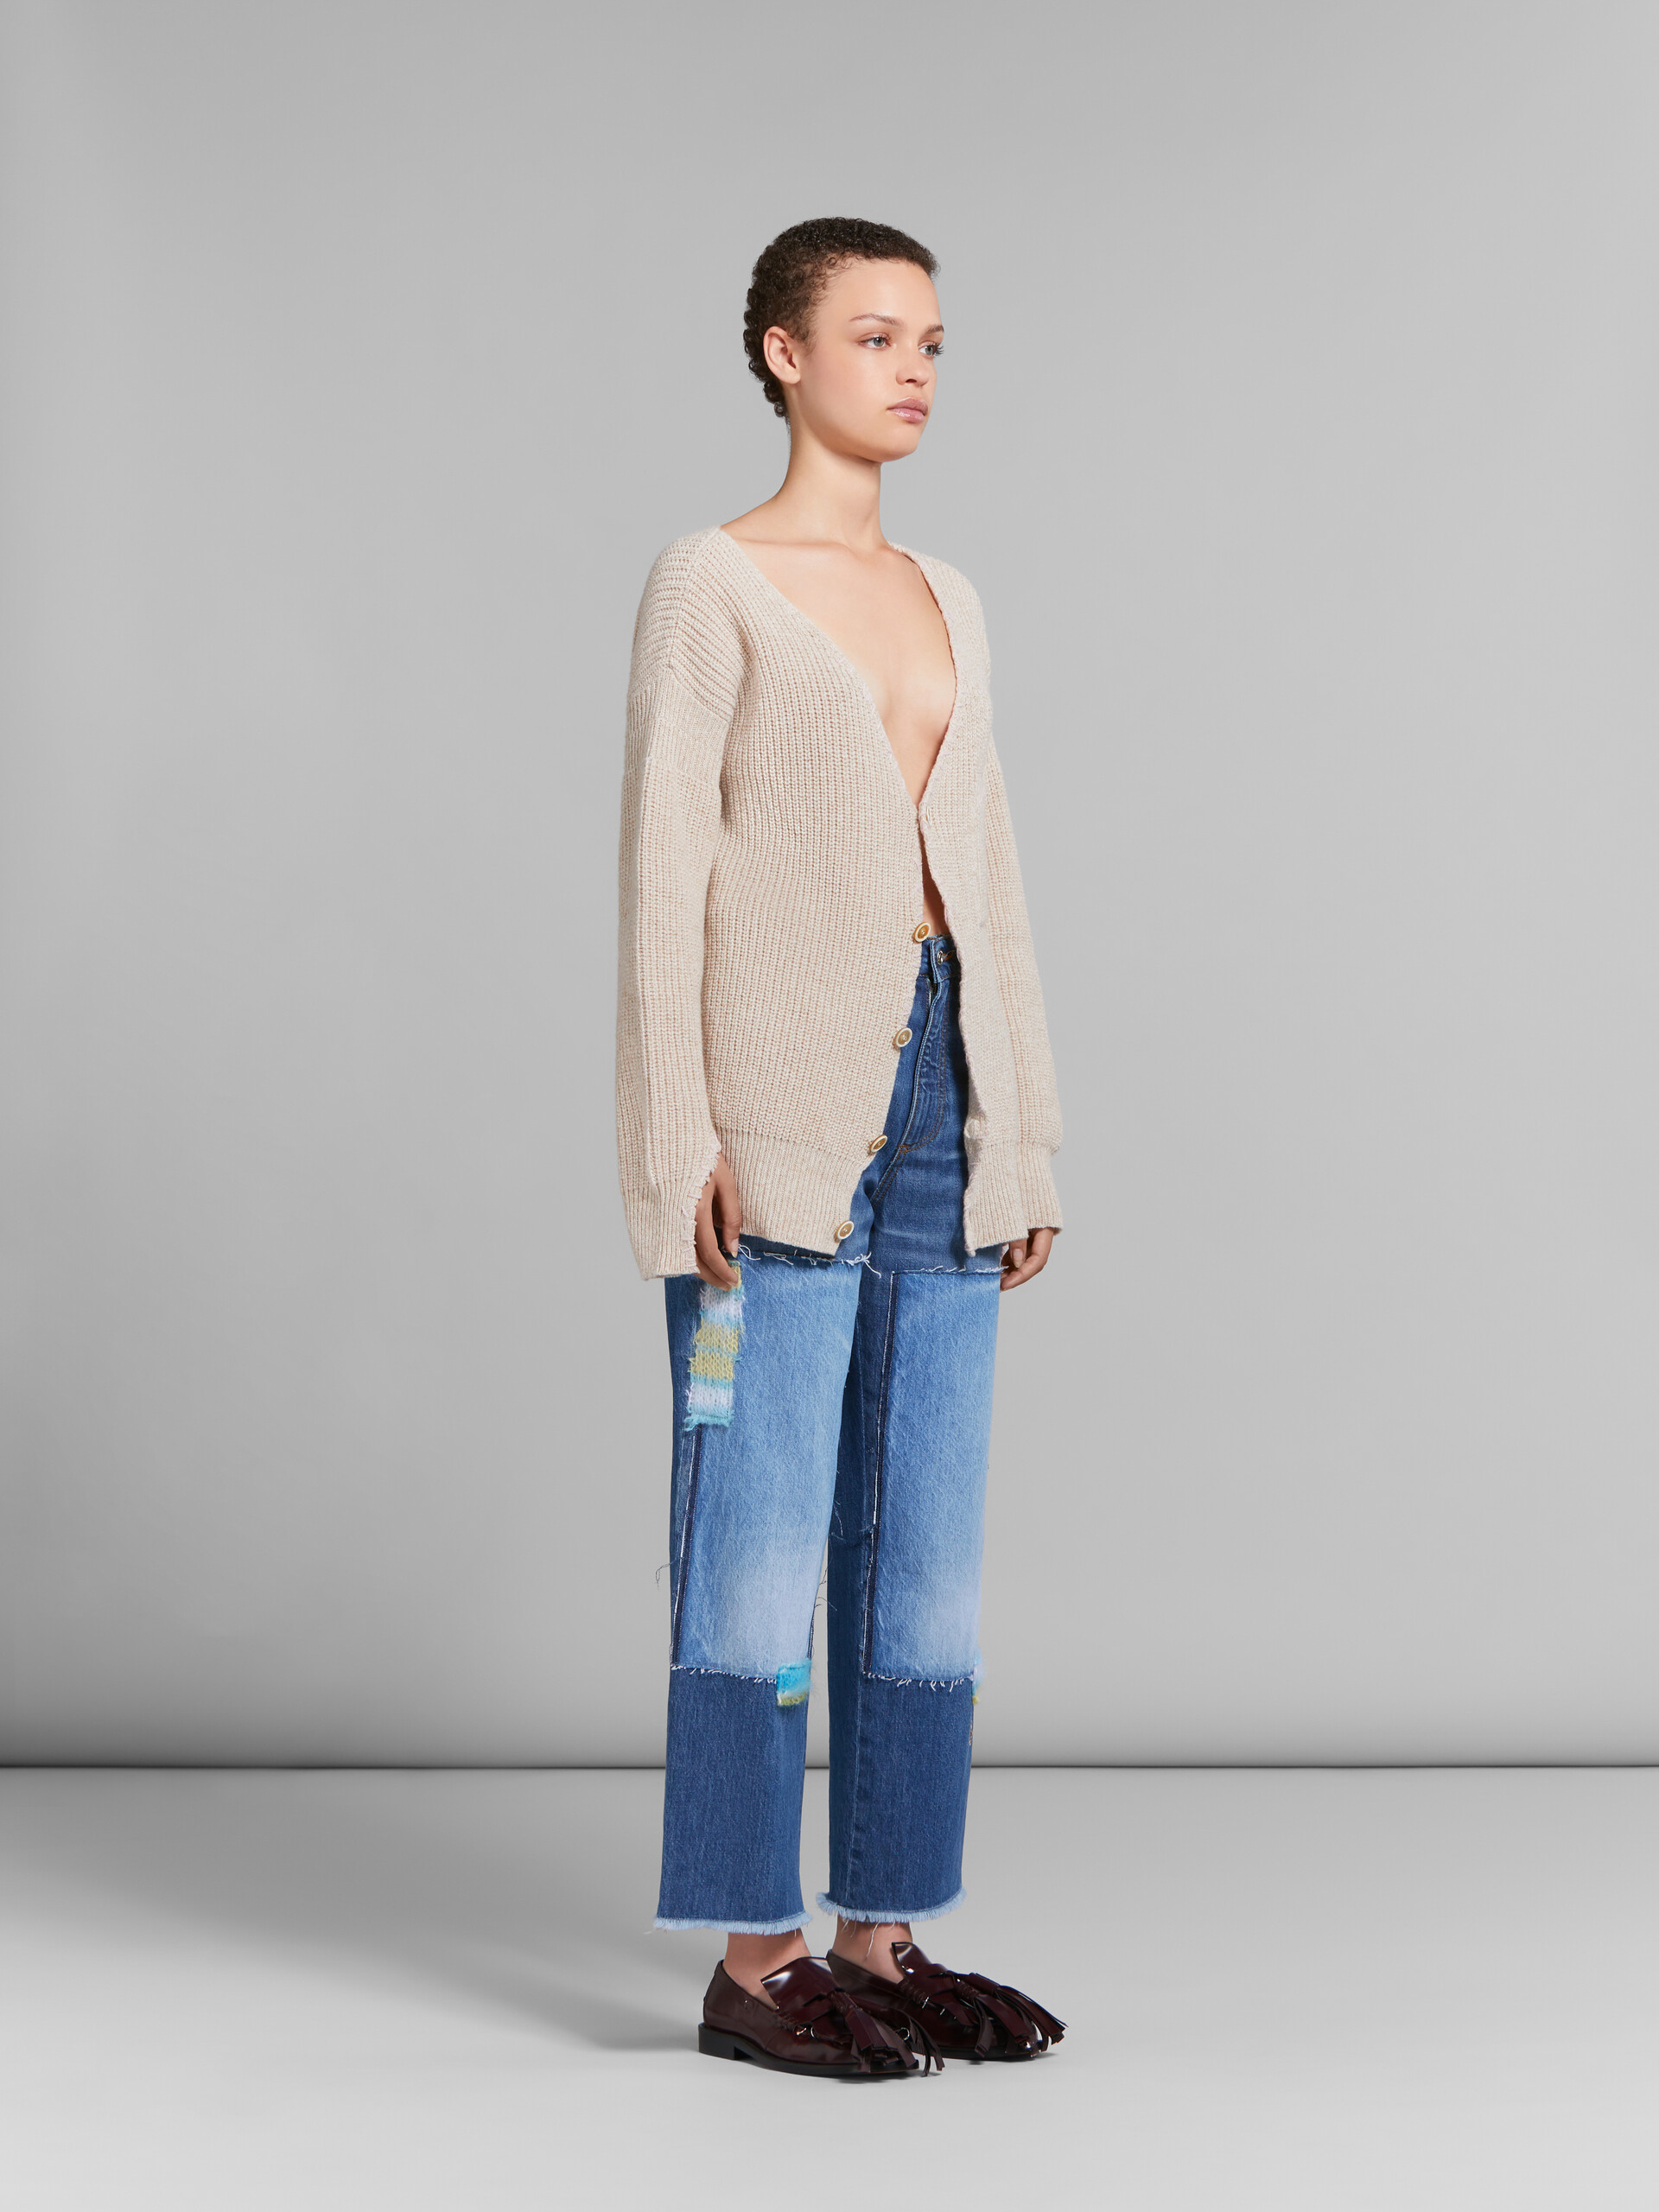 Oat wool cardigan with Marni mending - Pullovers - Image 6